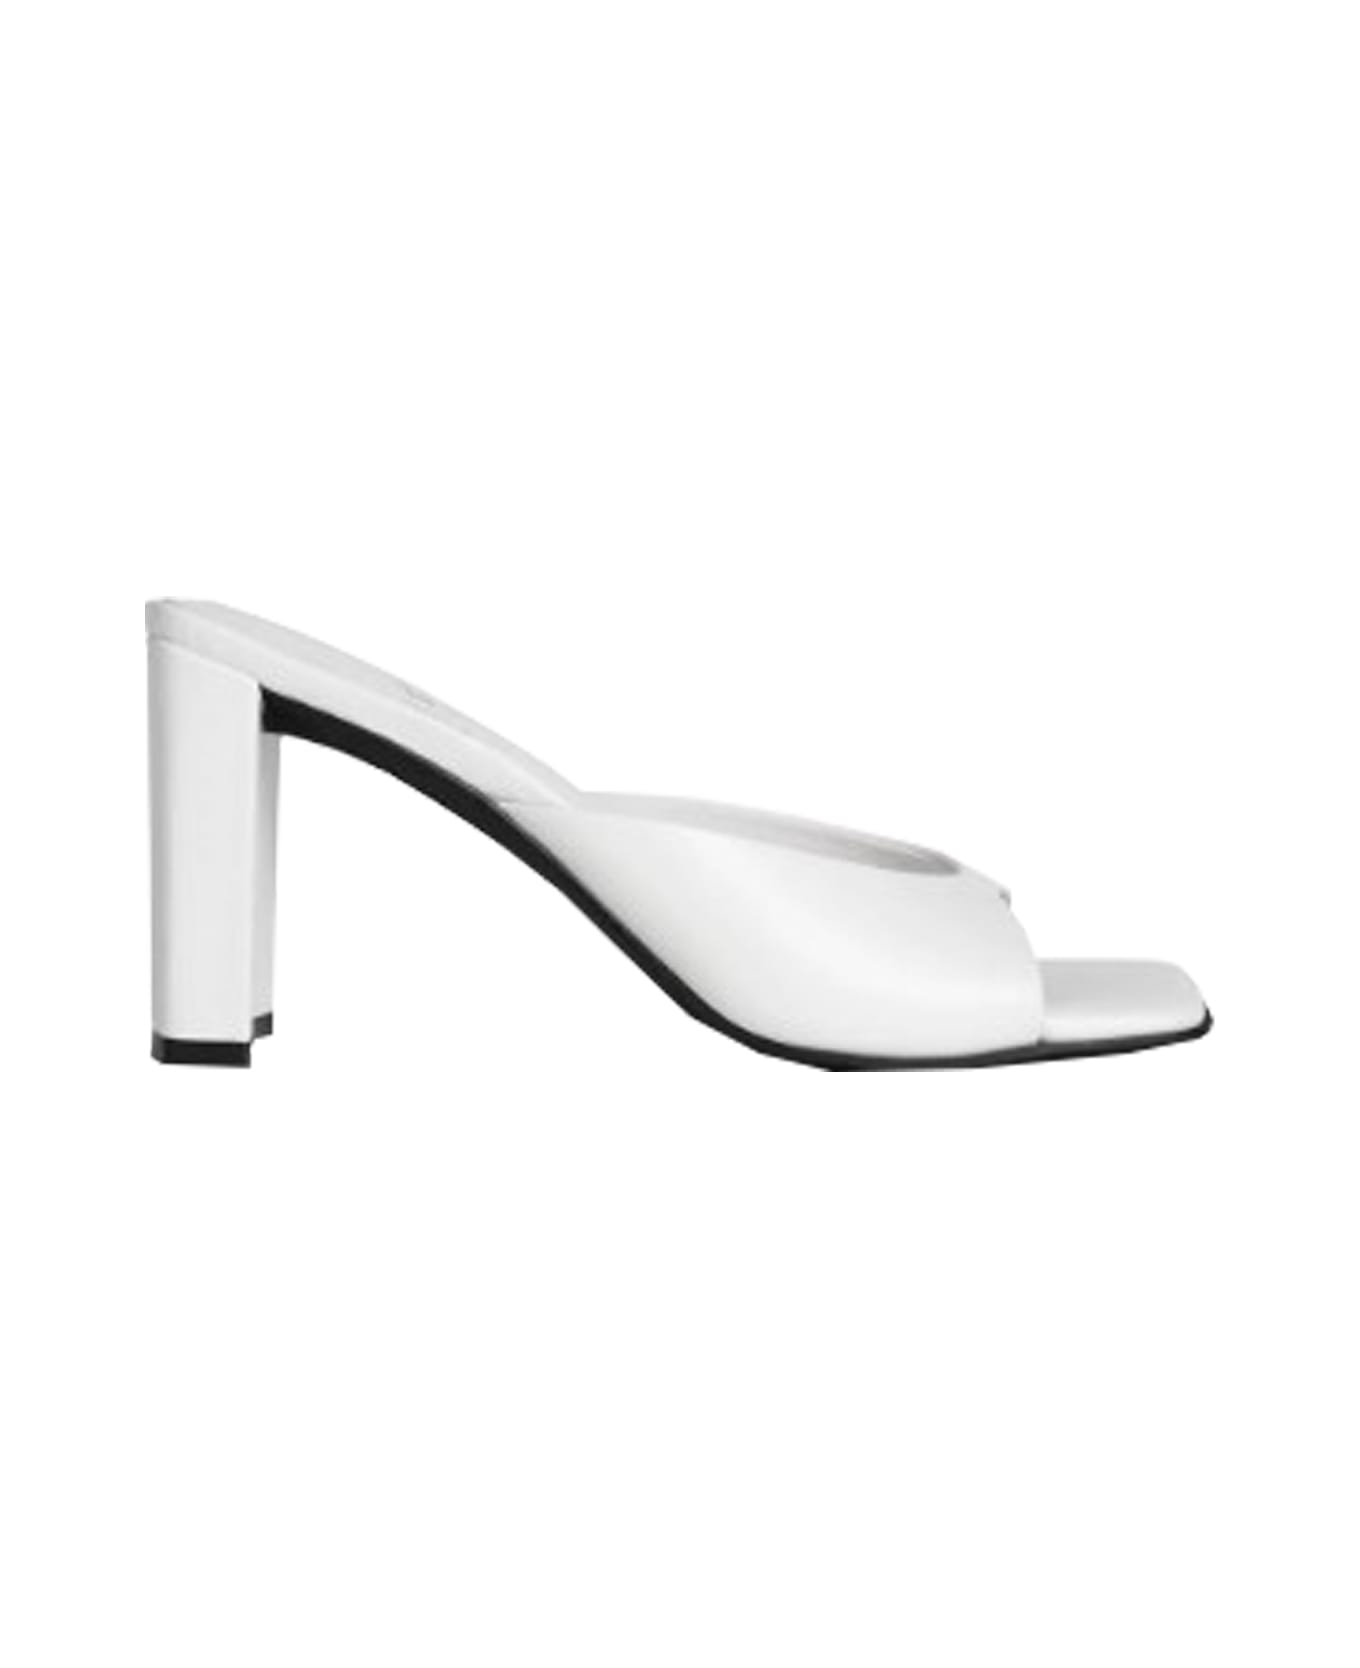 Jeffrey Campbell Shoes With Heel - White サンダル